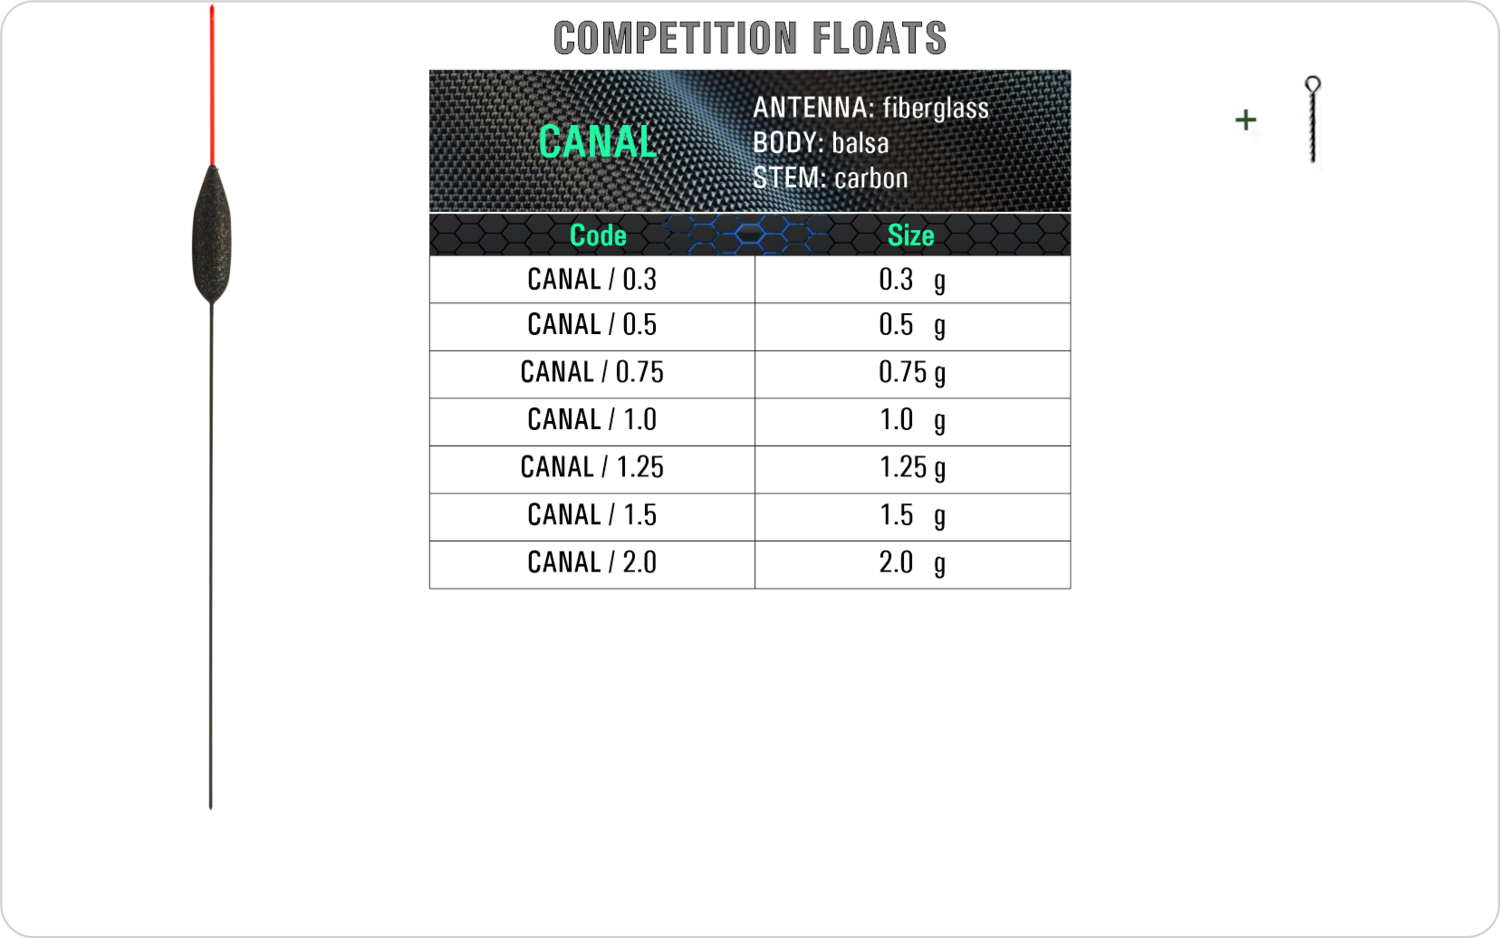 CANAL Competition float model and table containing an additional information about this float with different codes, sizes, types of the body, the stem and the antenna of the float.